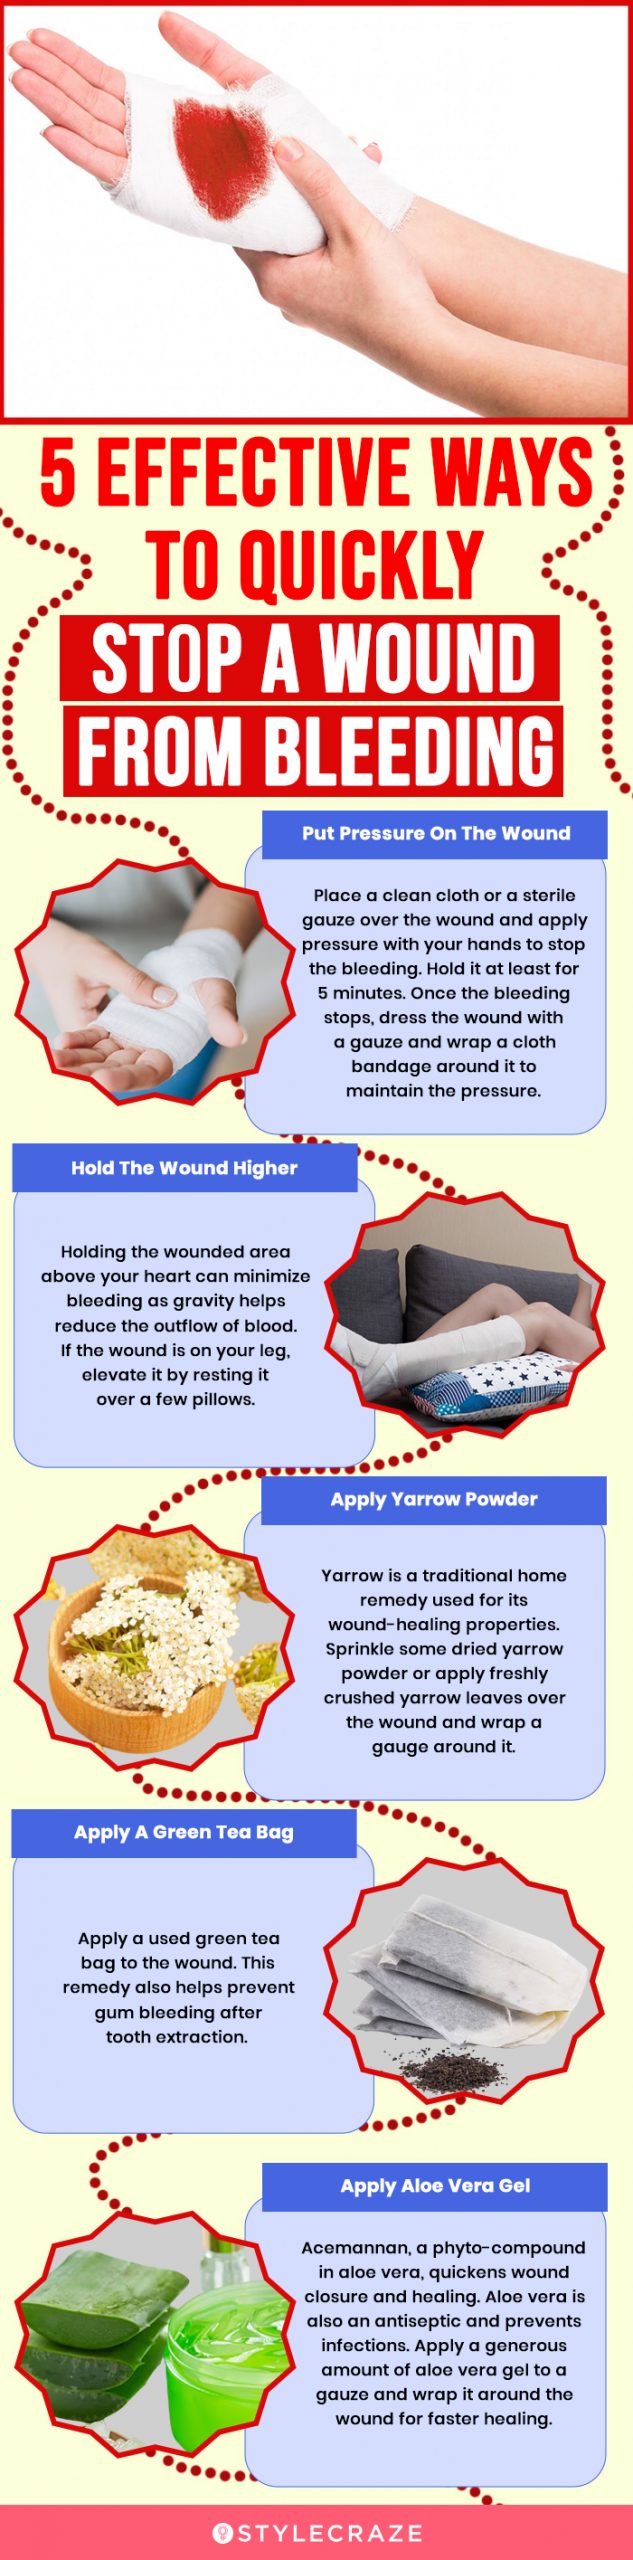 5 effective ways to quickly stop a wound from bleeding (infographic)